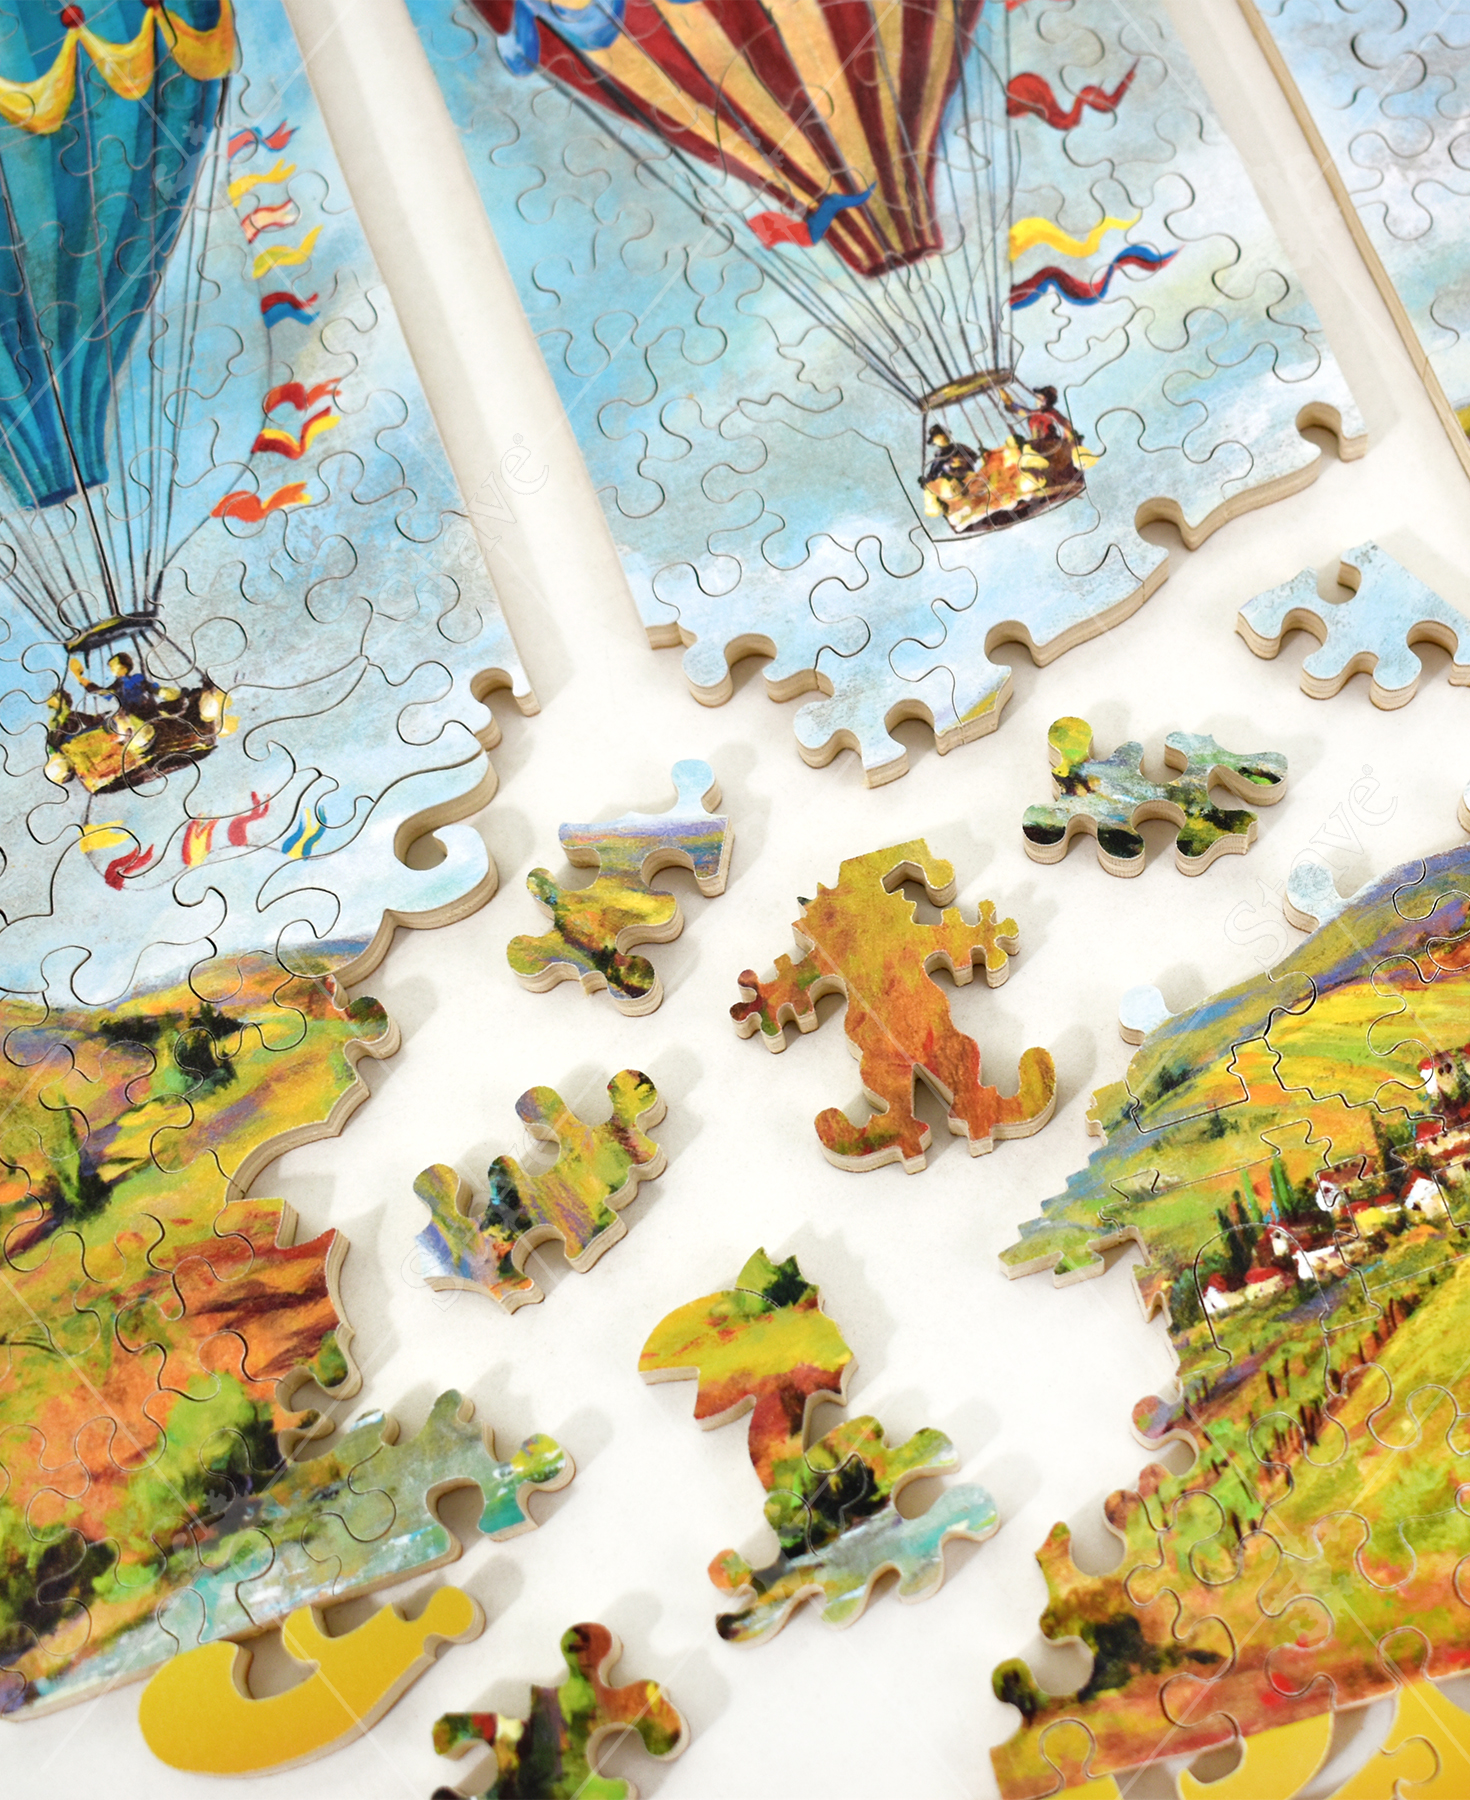 Pieces taken apart of Race Around The World wooden jigsaw puzzle showing two of the three panels, each capturing a hot air balloon soaring in the bright blue sky over a town located on a mountainous landscape.